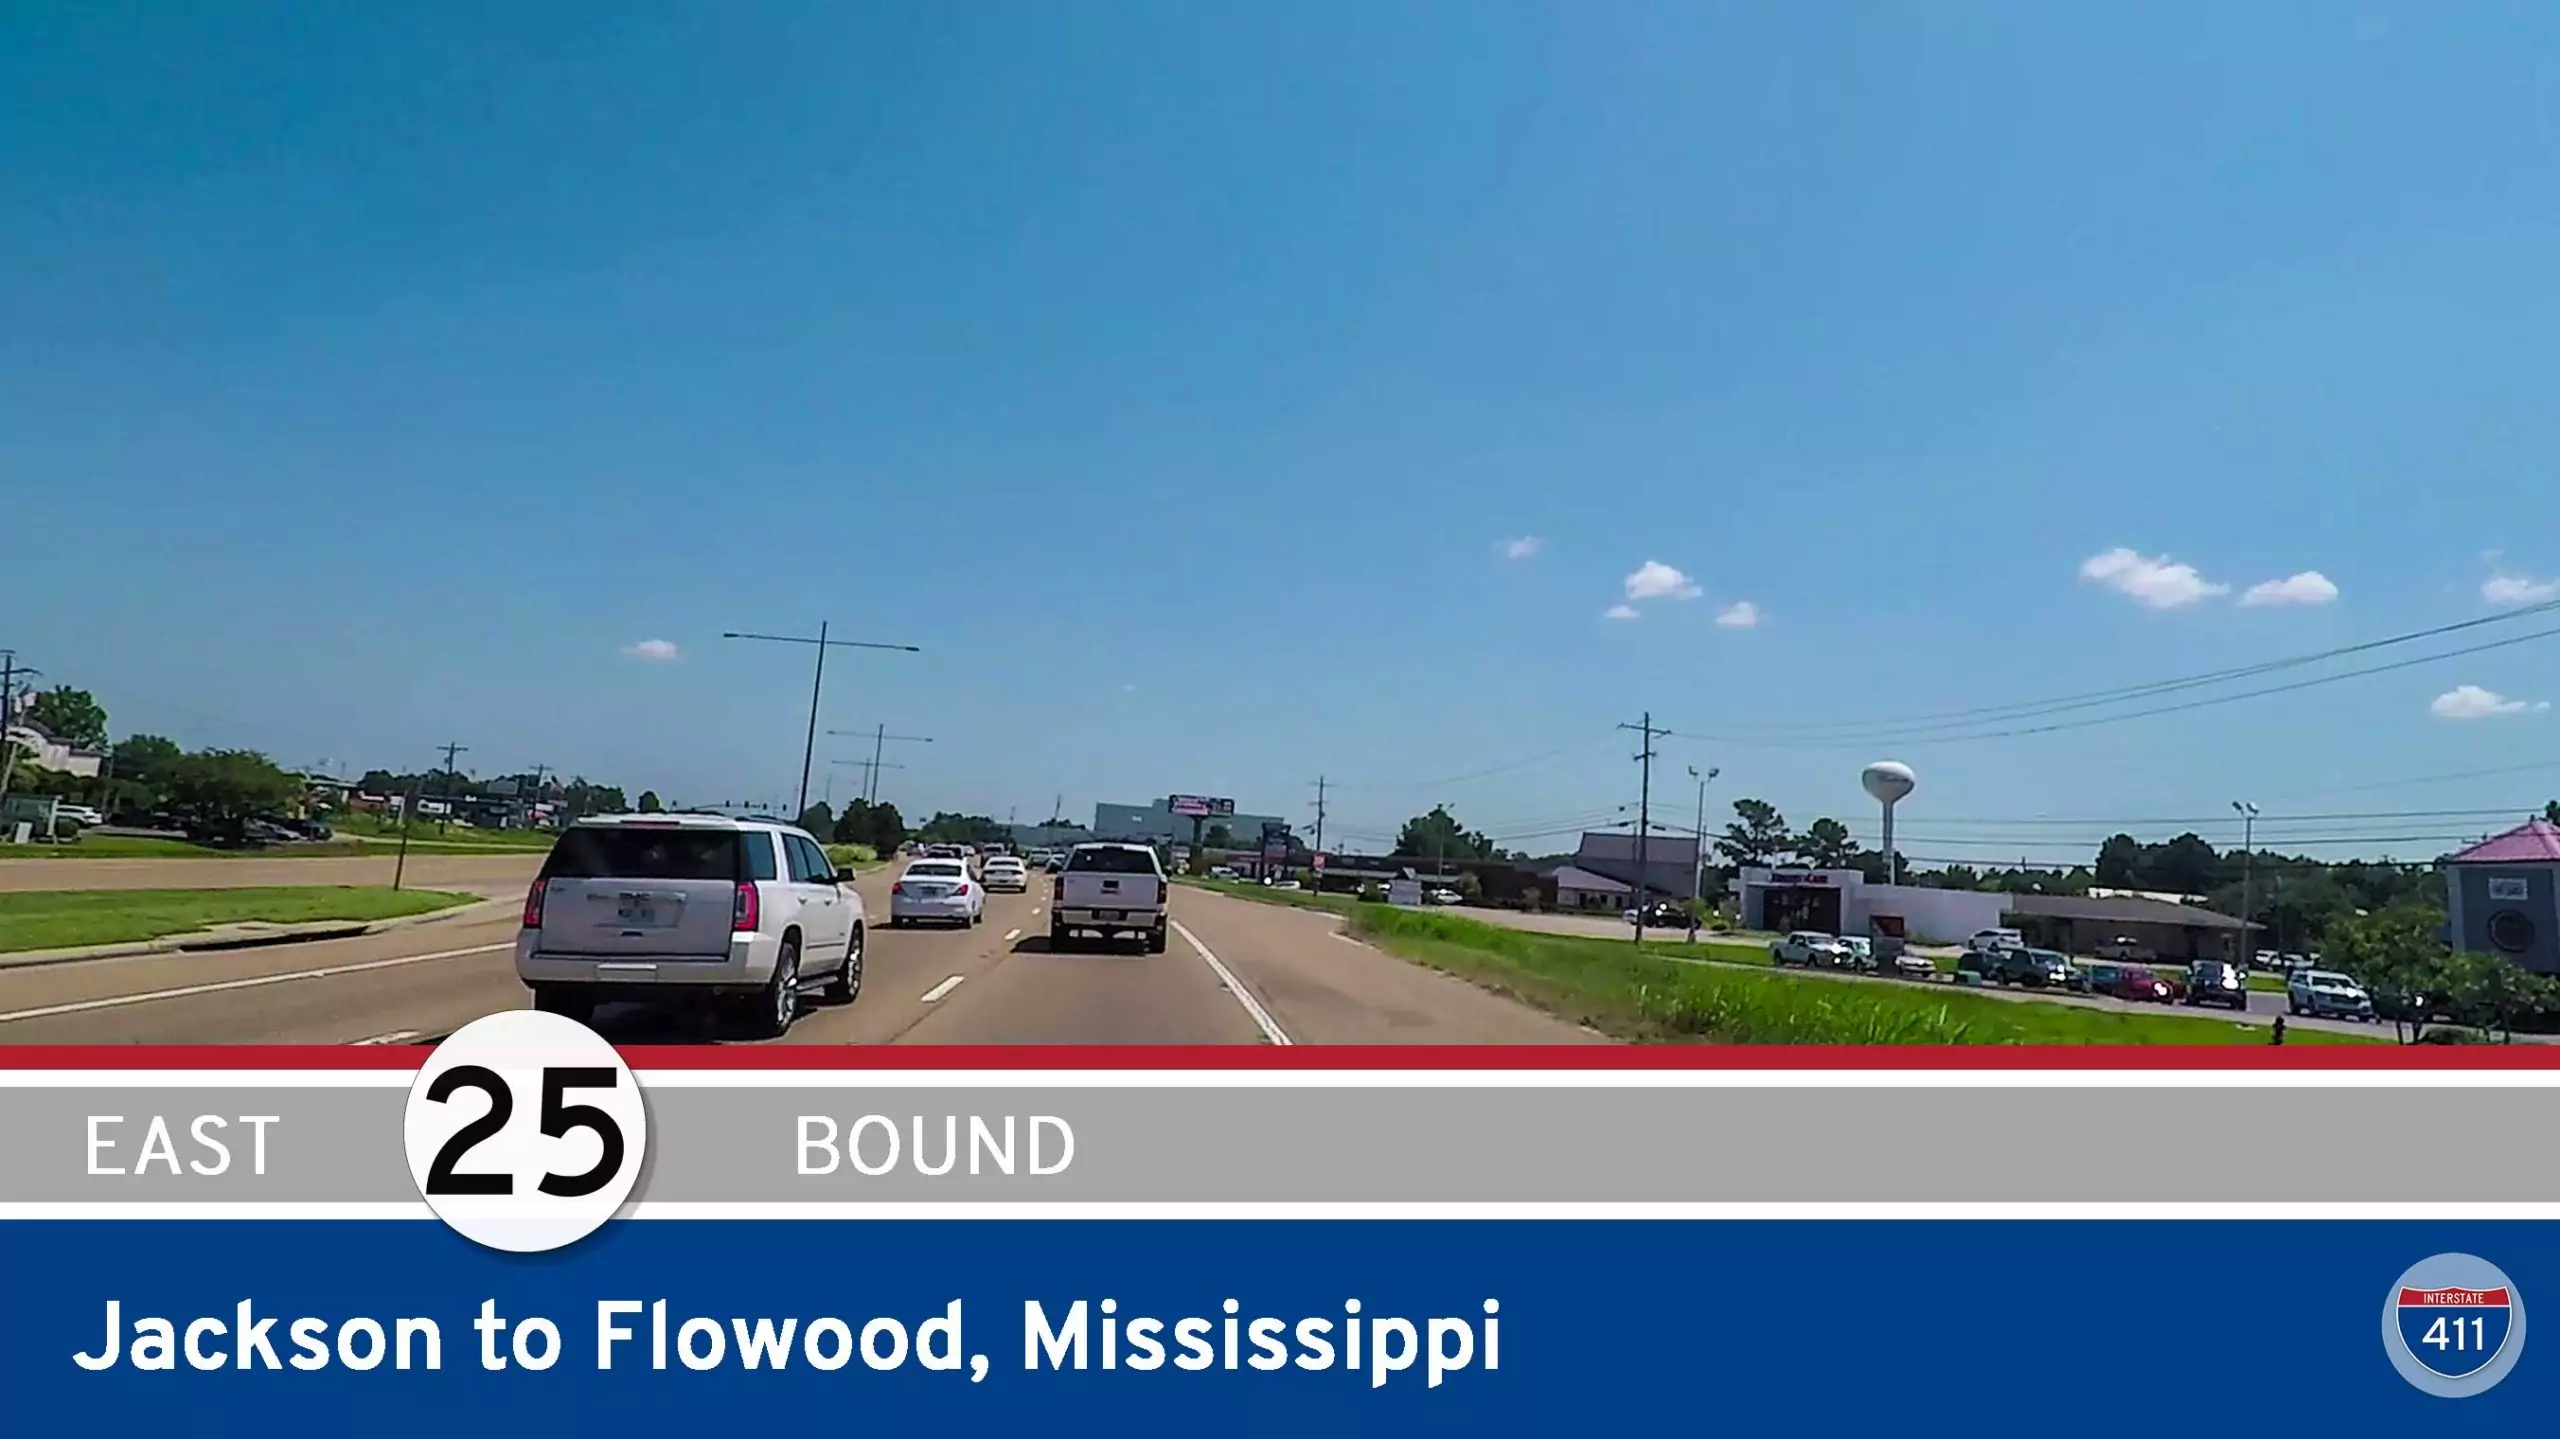 Drive America's Highways for 3.5 miles east along Mississippi Highway 25 from Jackson to Flowood, Mississippi.